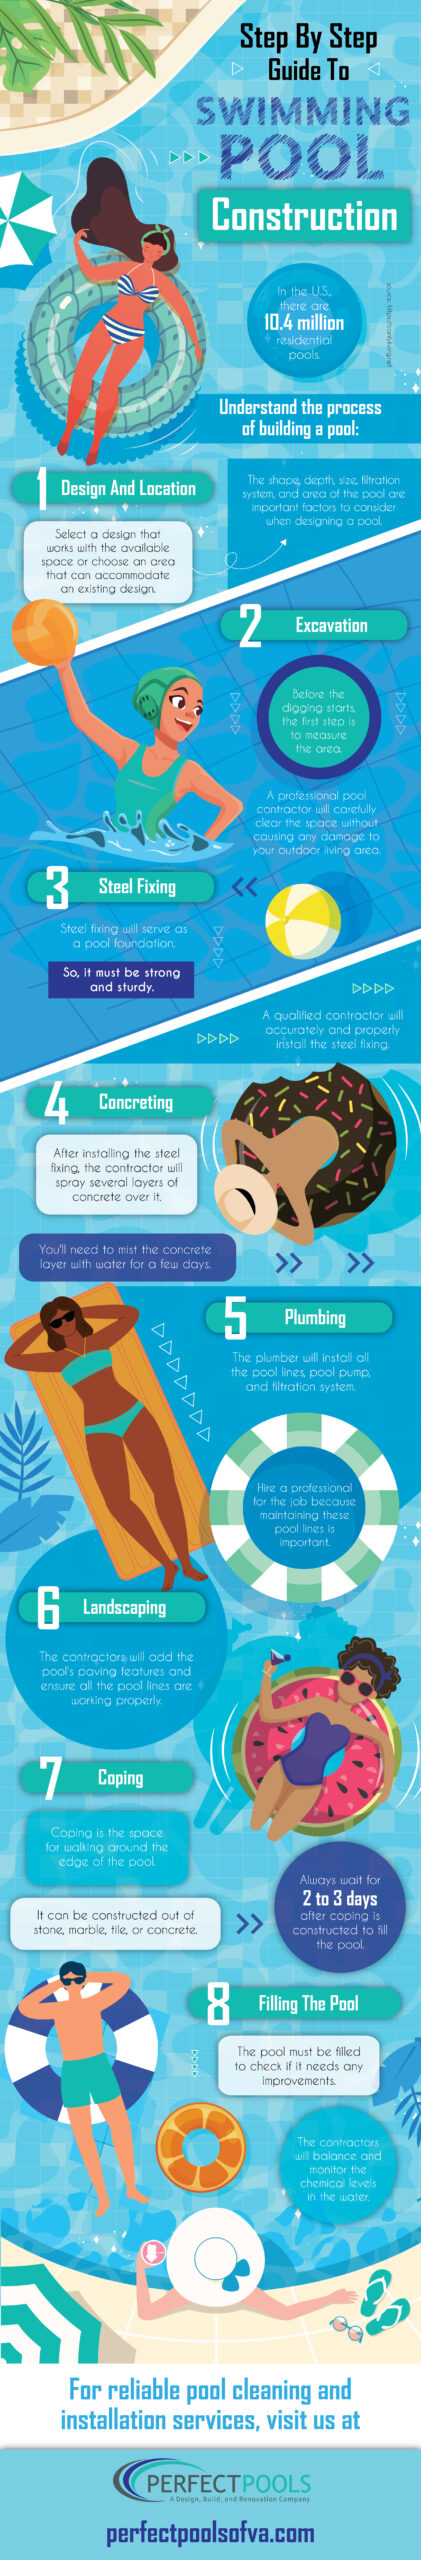 Guide to Swimming Pool Construction - Infograph